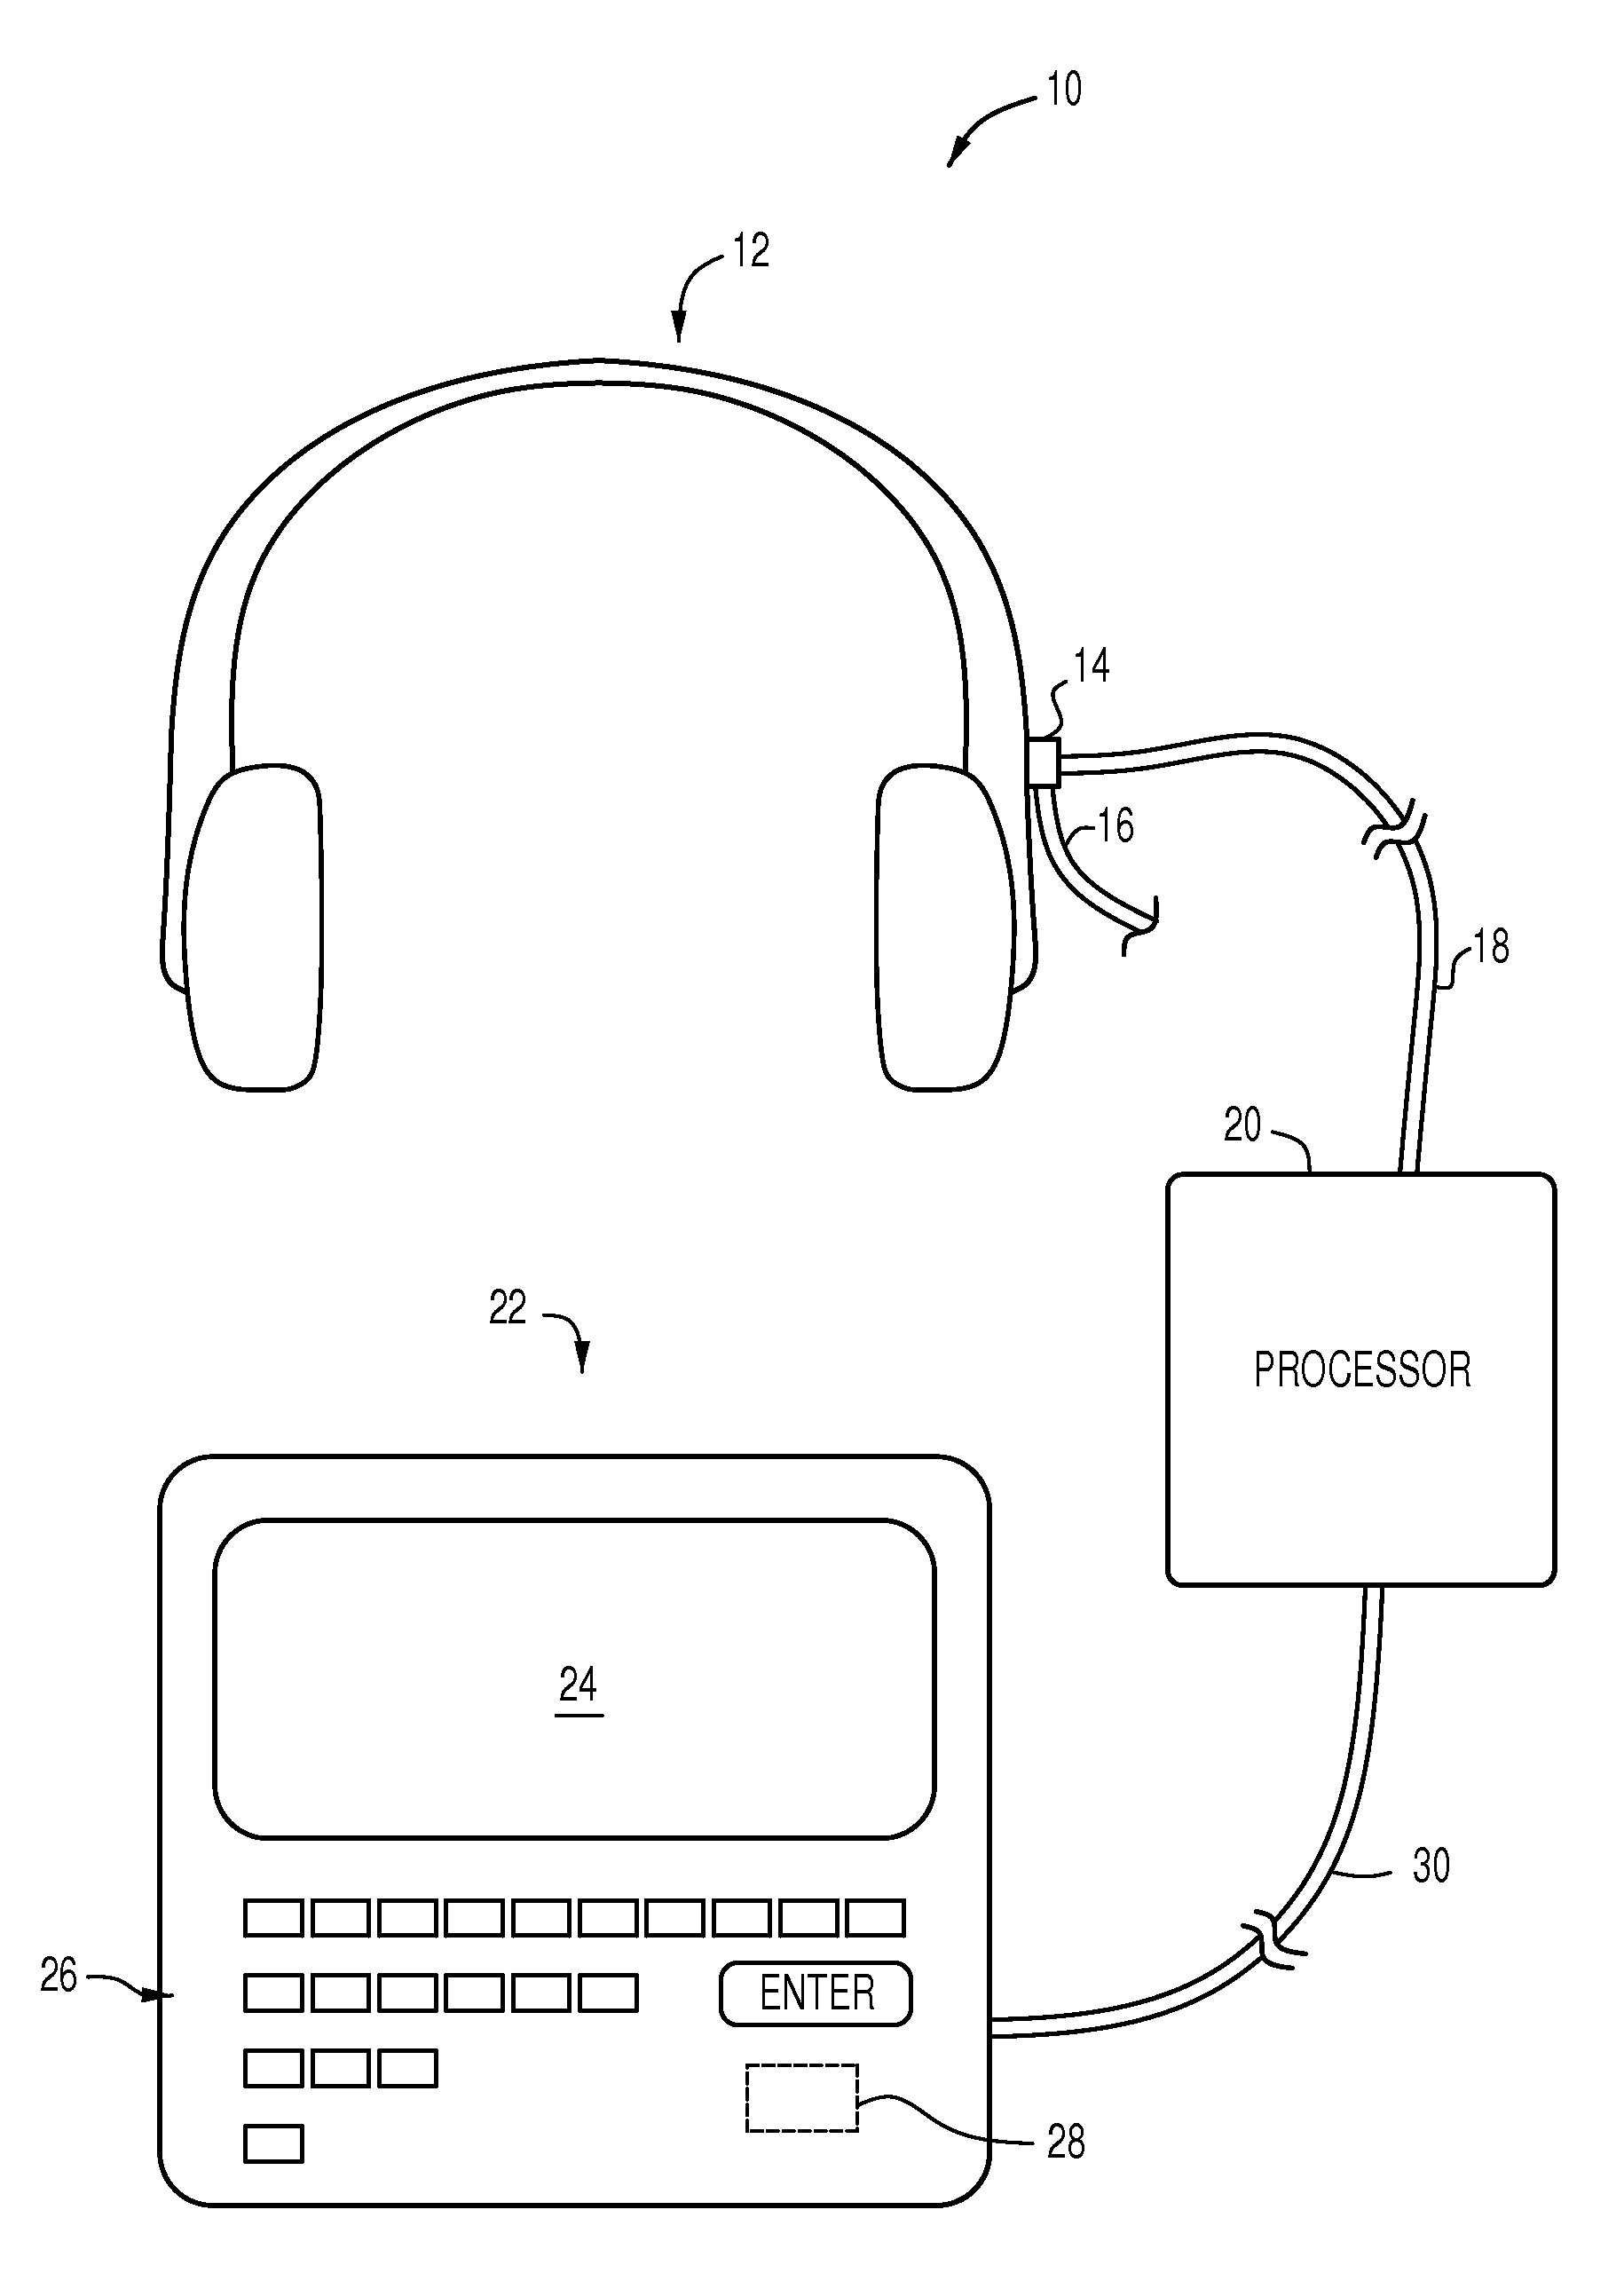 Graphic display system for assisting vehicle operators